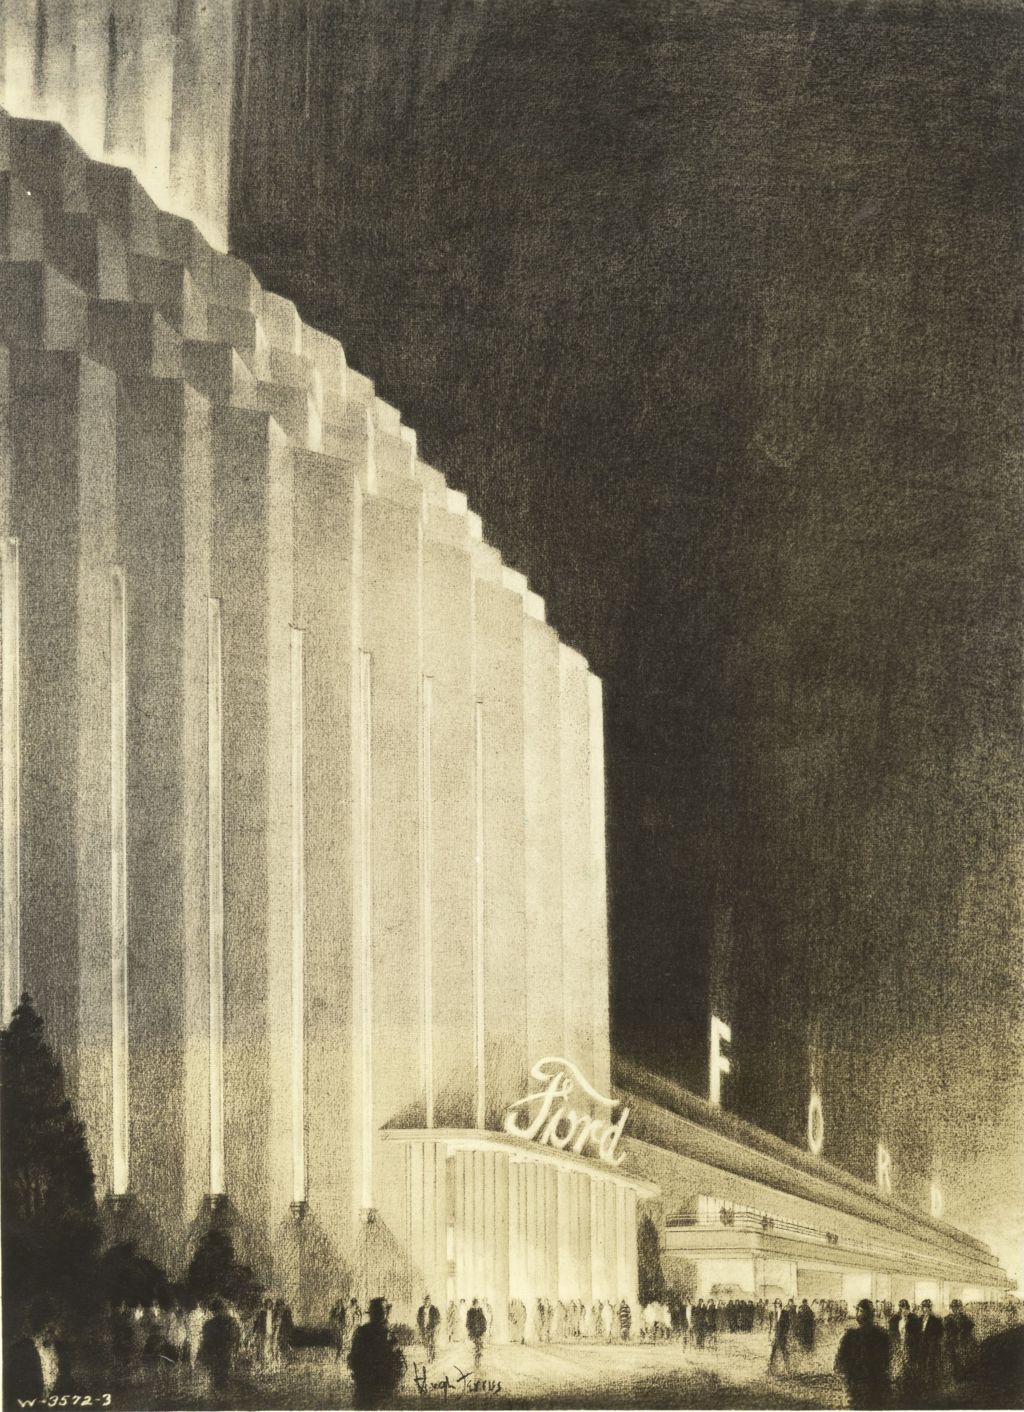 Conception by Hugh Ferriss of how the Ford Exhibition building will look at night